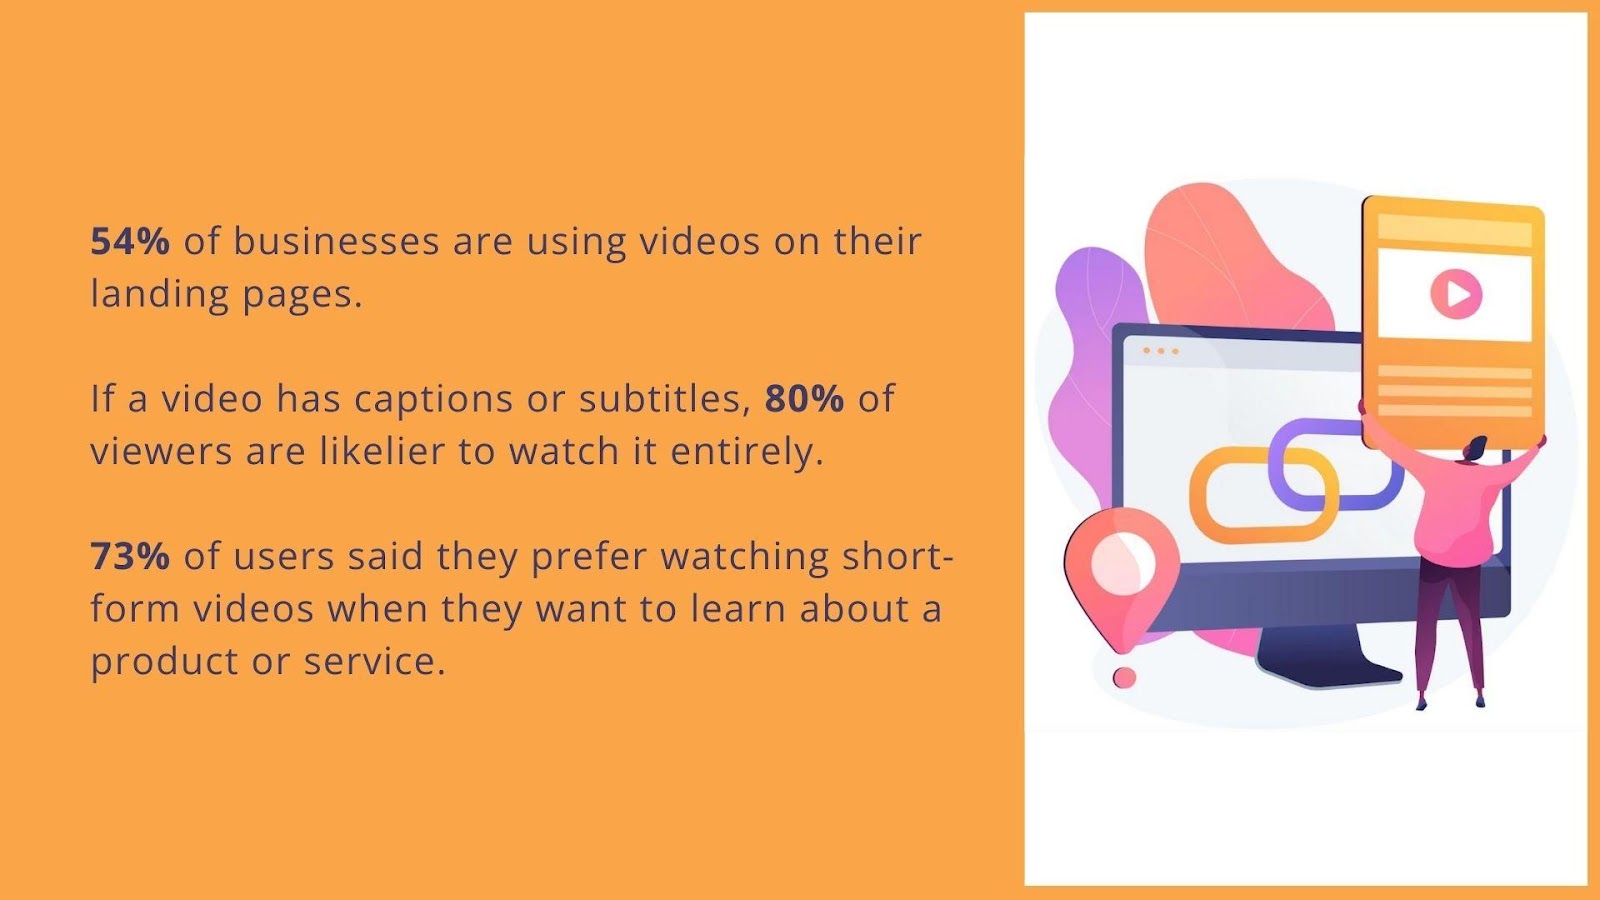 54% of businesses are using videos on their landing pages. If a video has captions or subtitles, 80% of viewers are likelier to watch it entirely. 73% of users said they prefer watching short-form videos when they want to learn about a product or service.